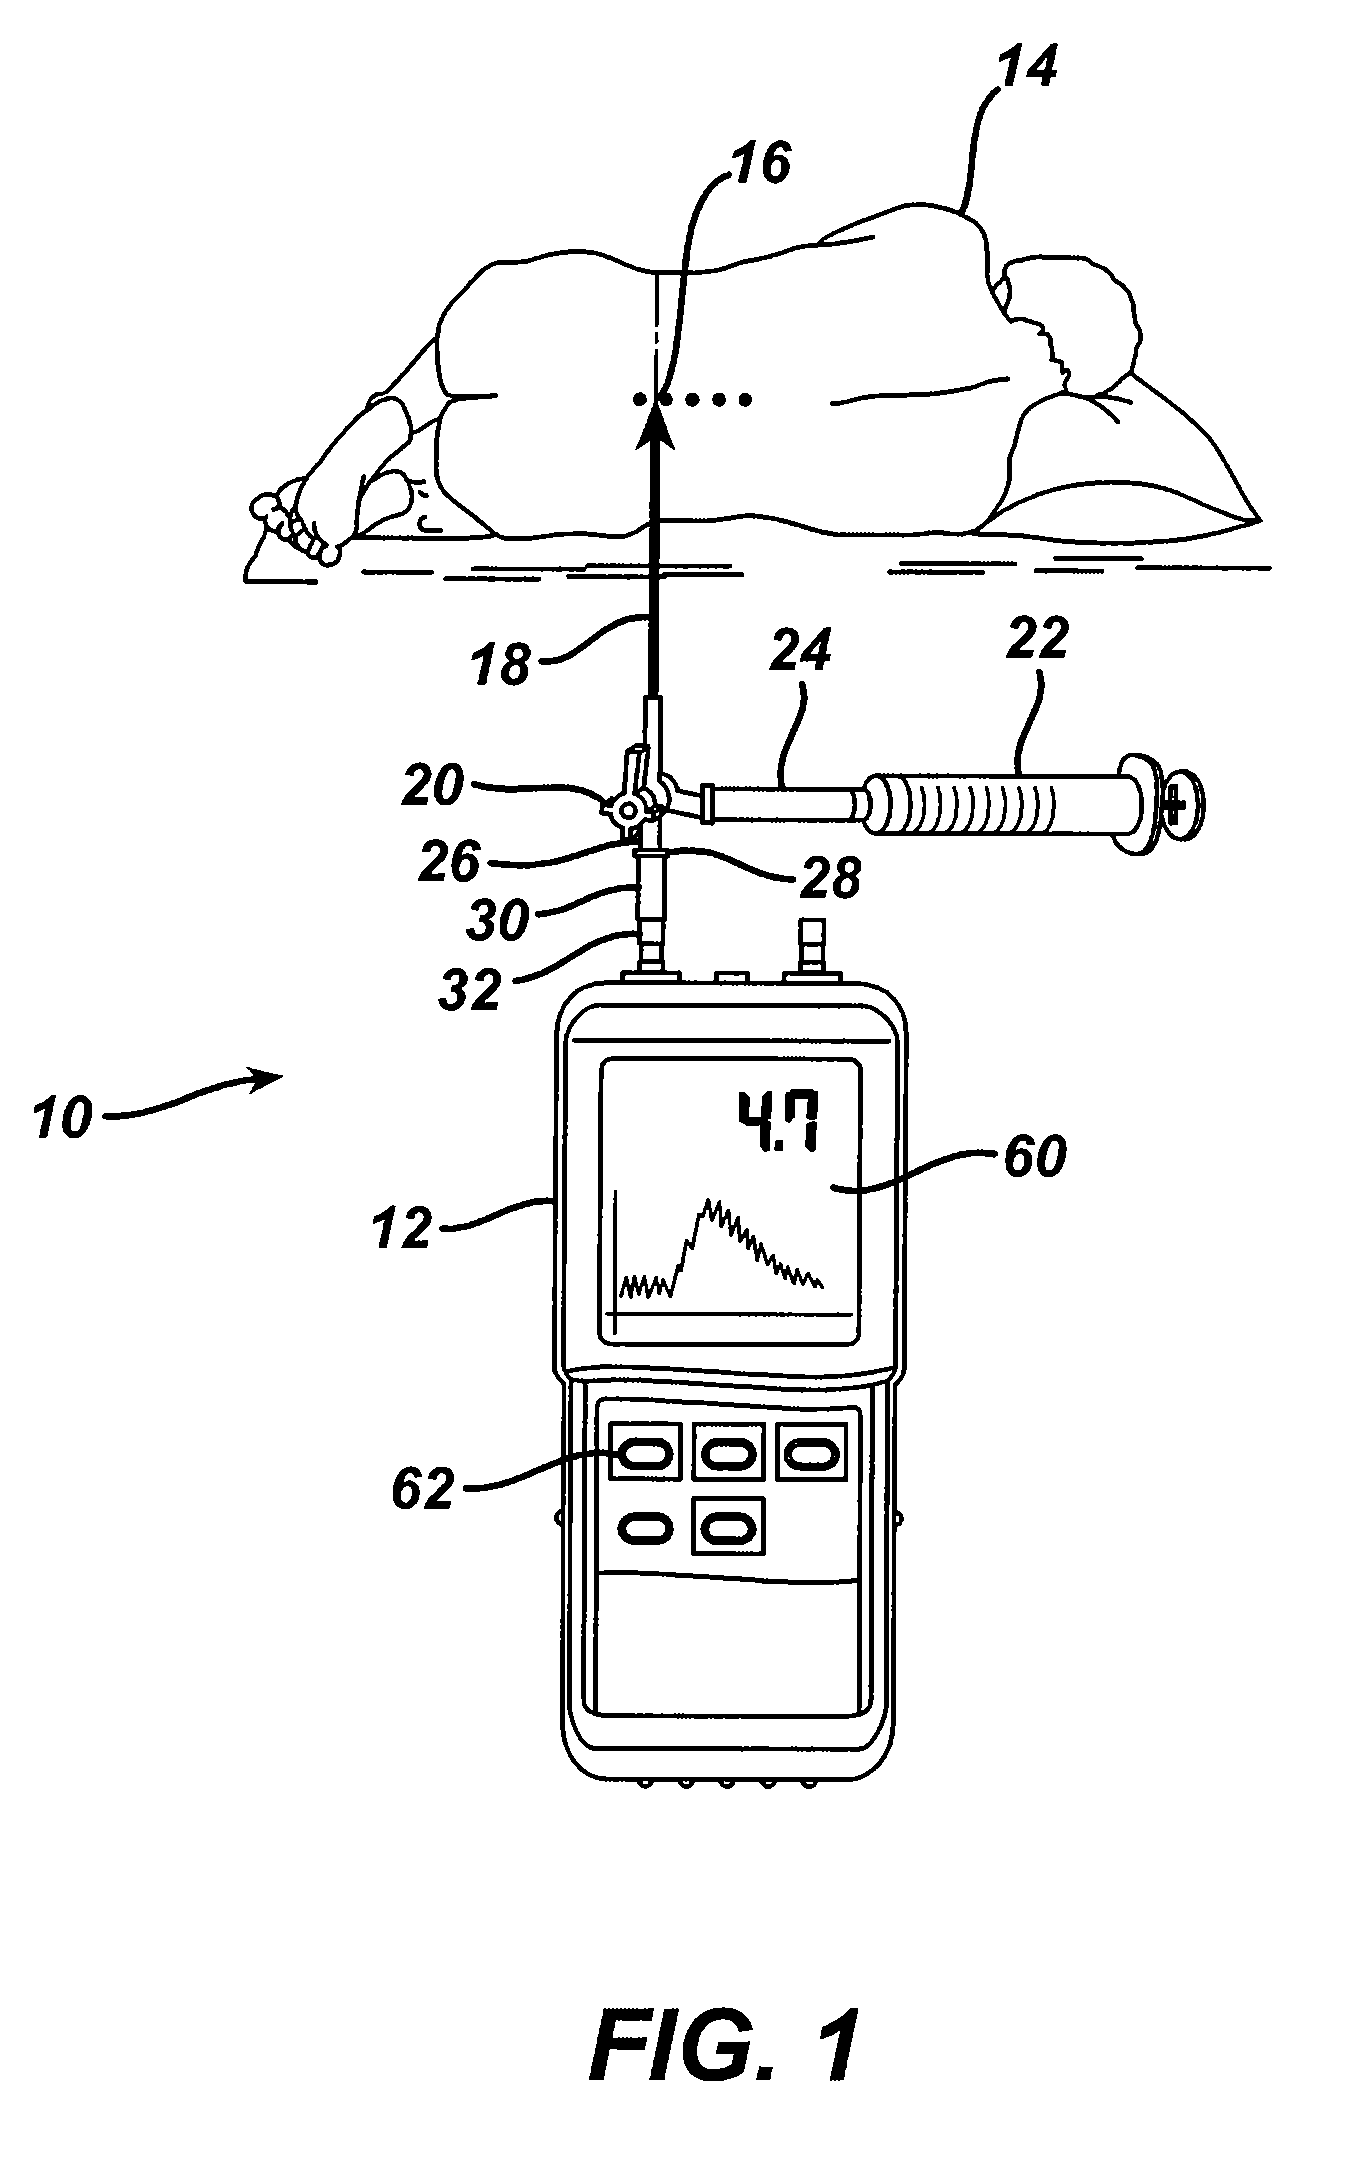 System and method for measuring the pressure of a fluid system within a patient